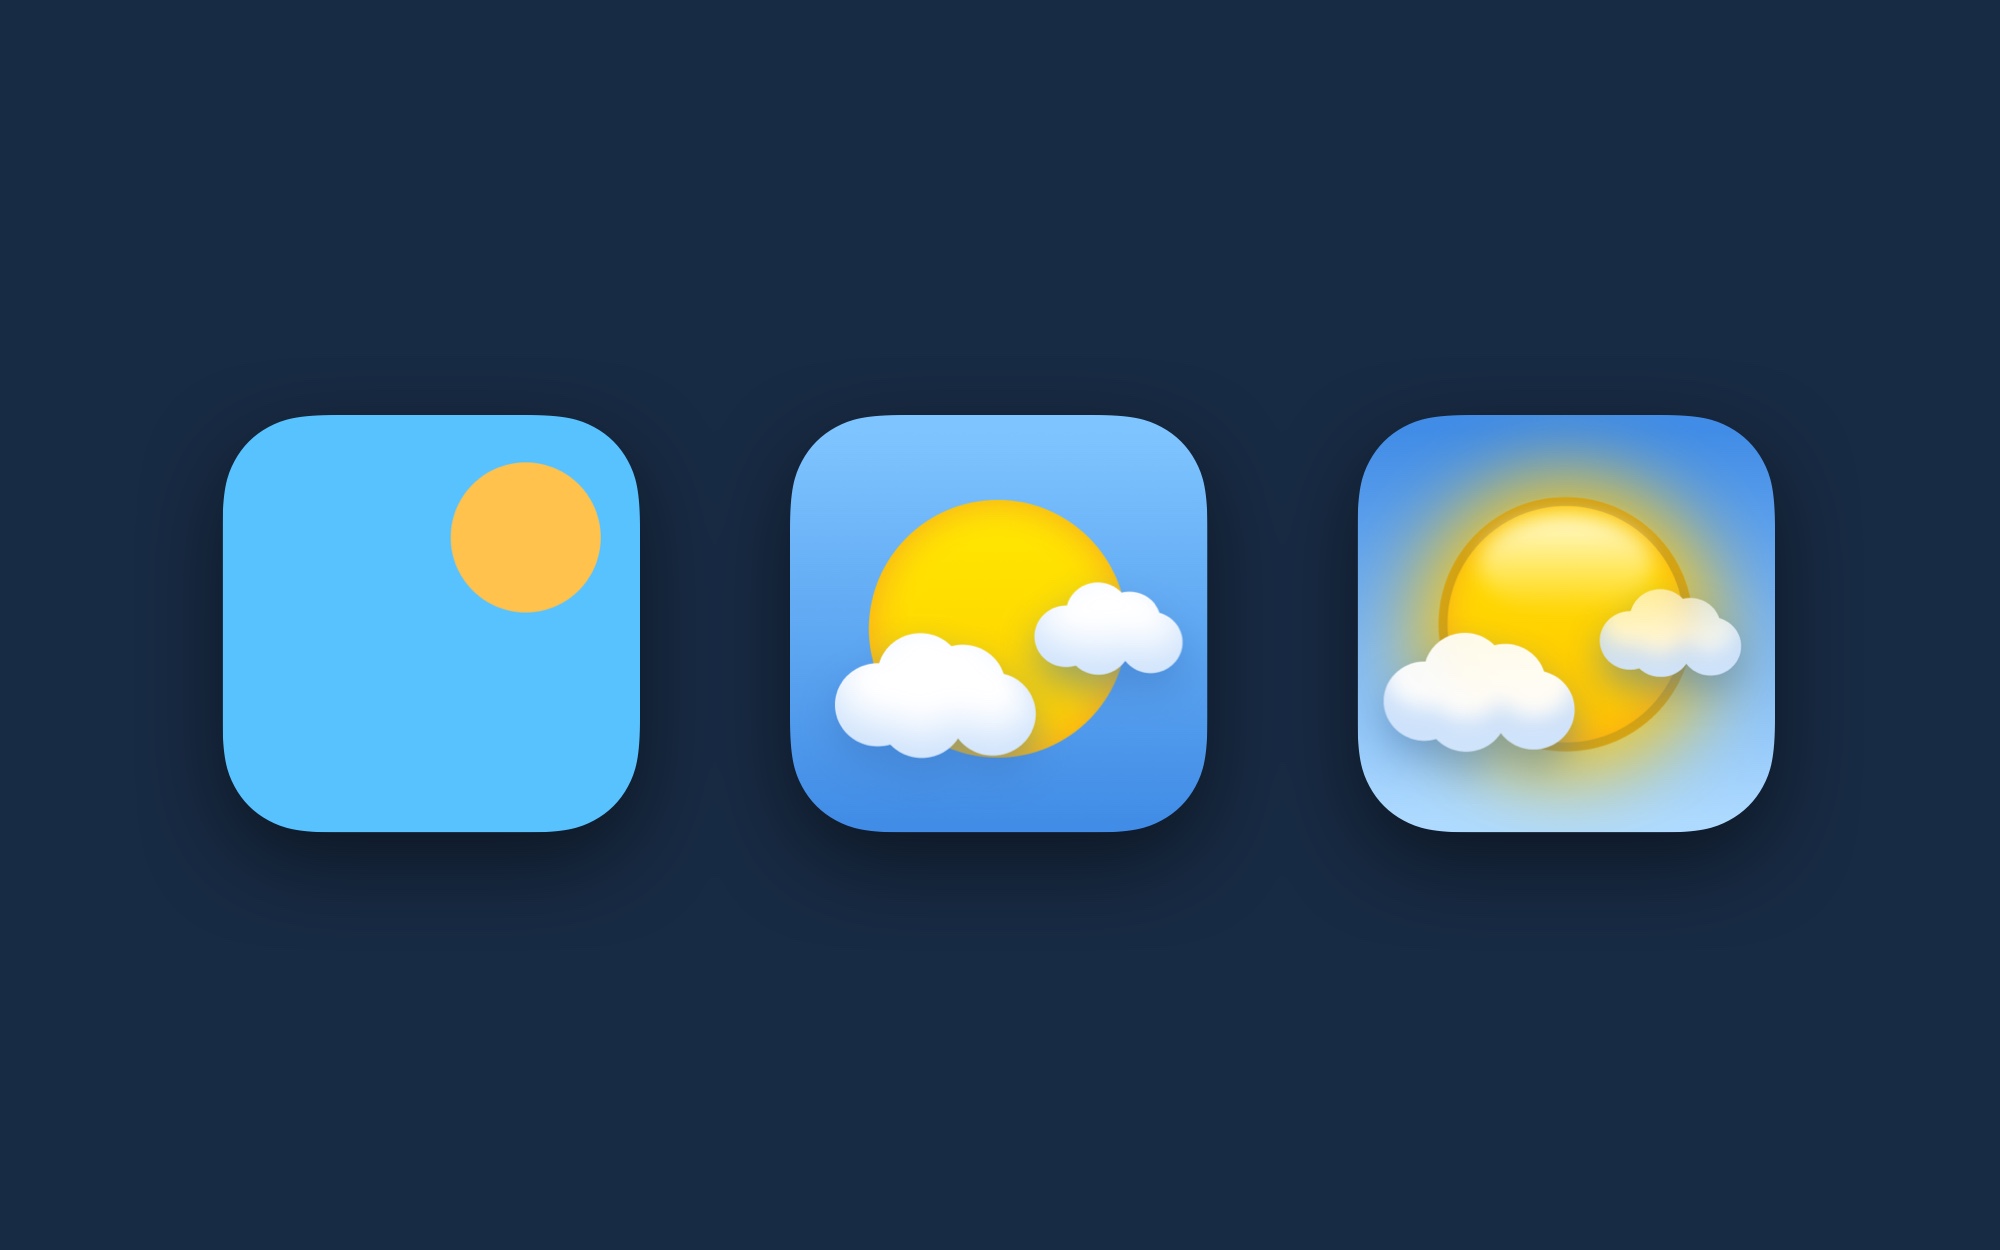 Comparison of the weather app icon in abstract, gradient and textured themes.